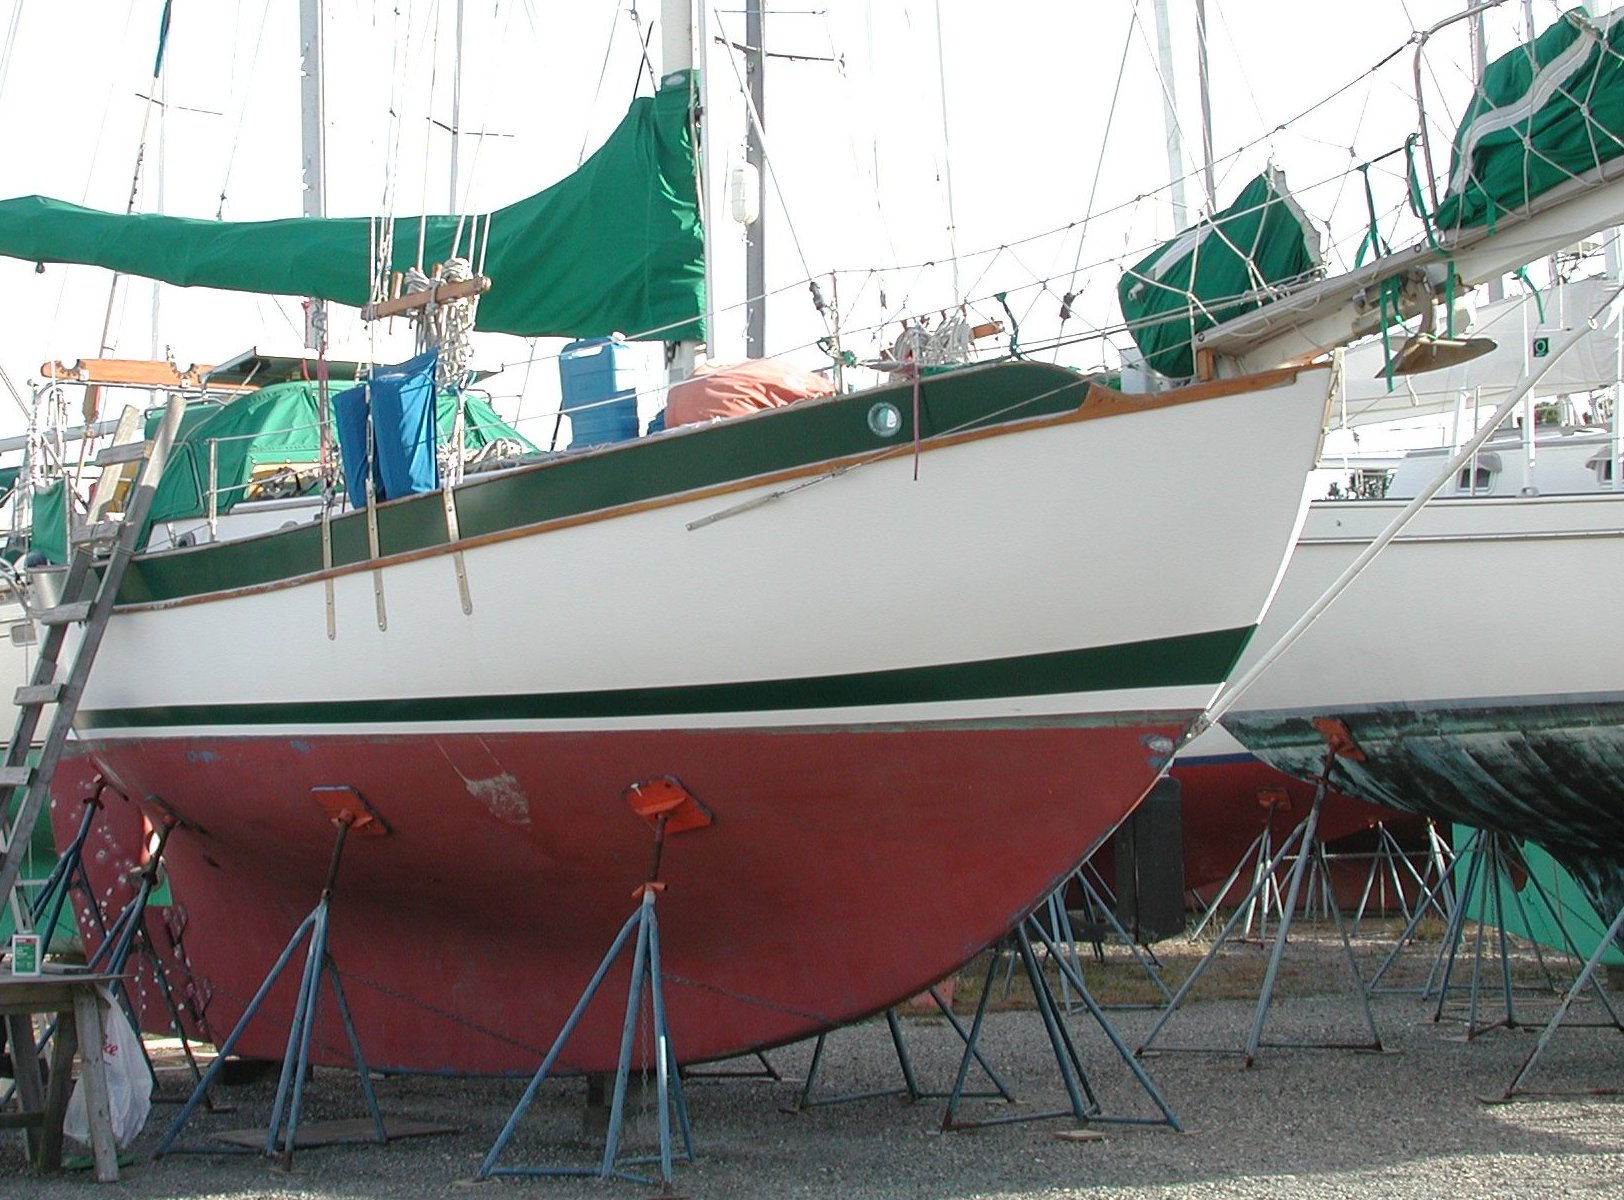 File:Westsail 32 on Stands.jpg - Wikimedia Commons